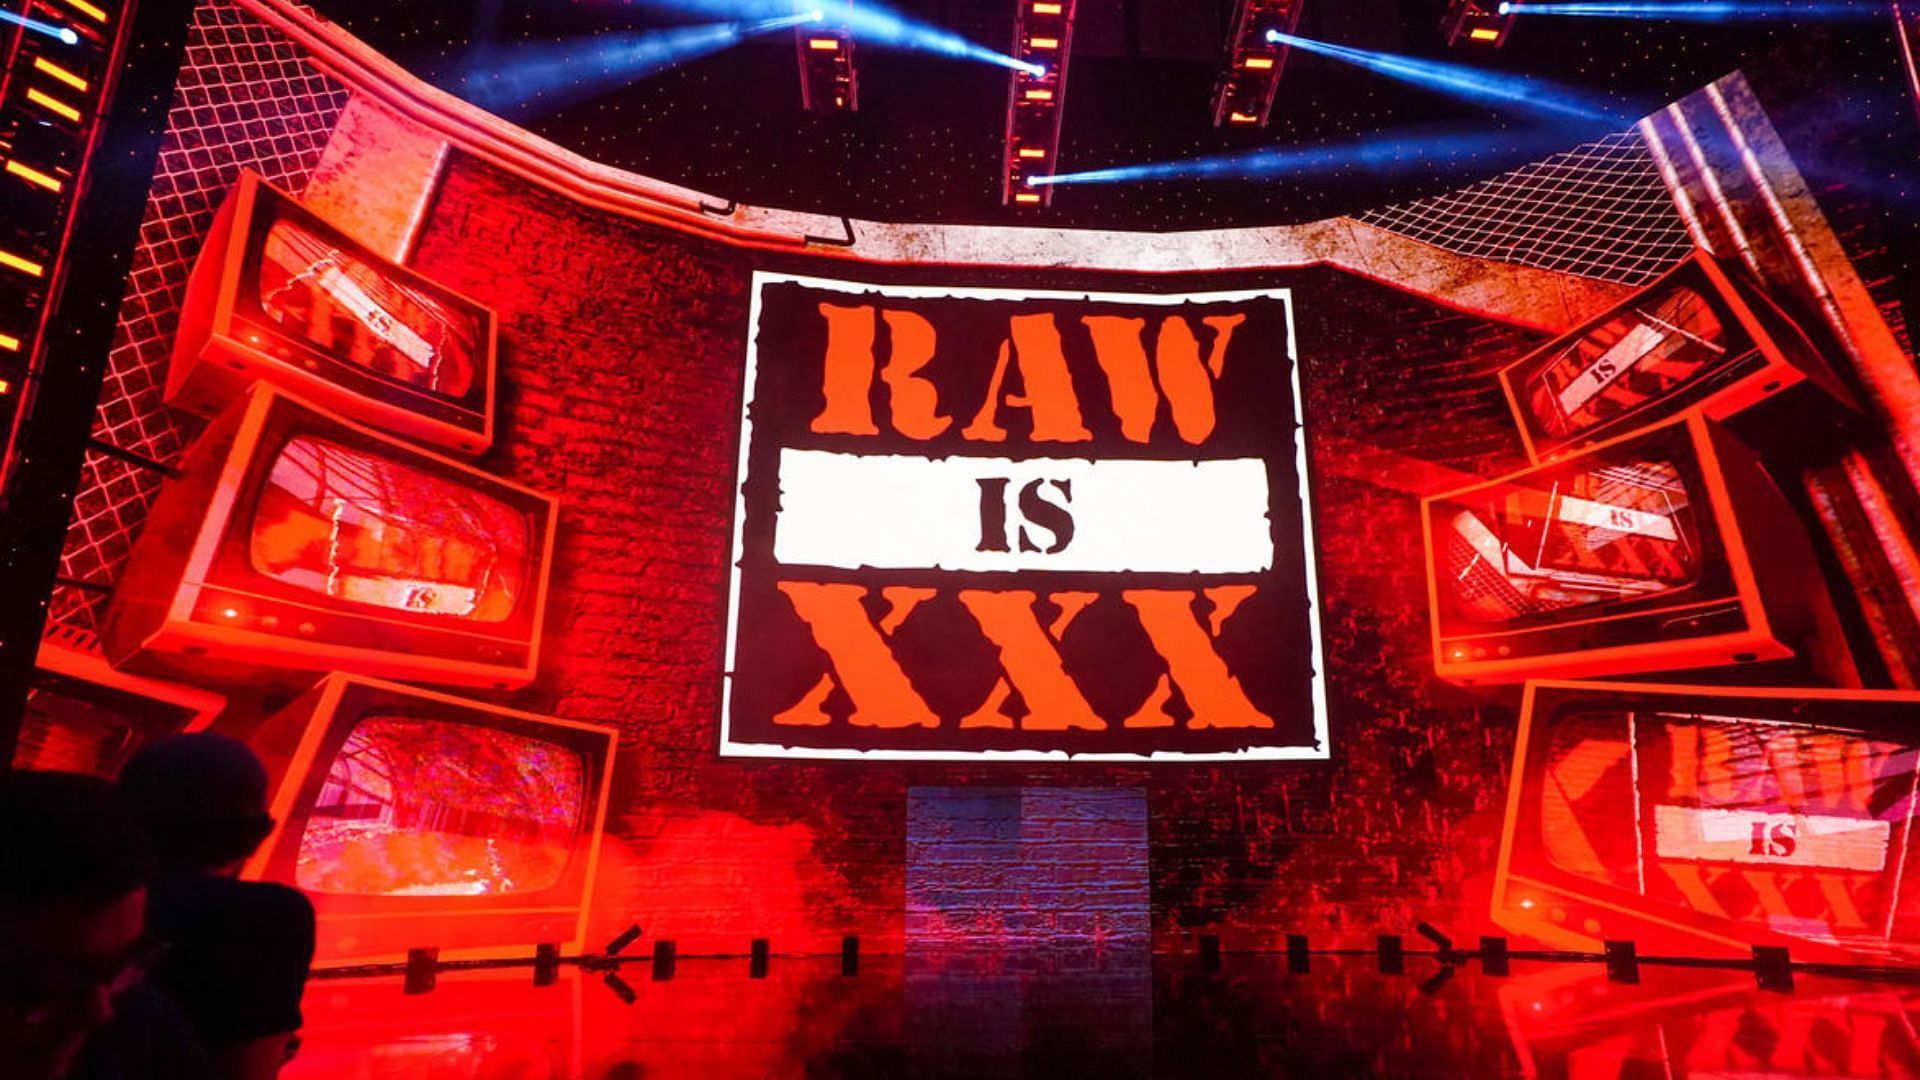 WWE RAW 30 was a memorable show.